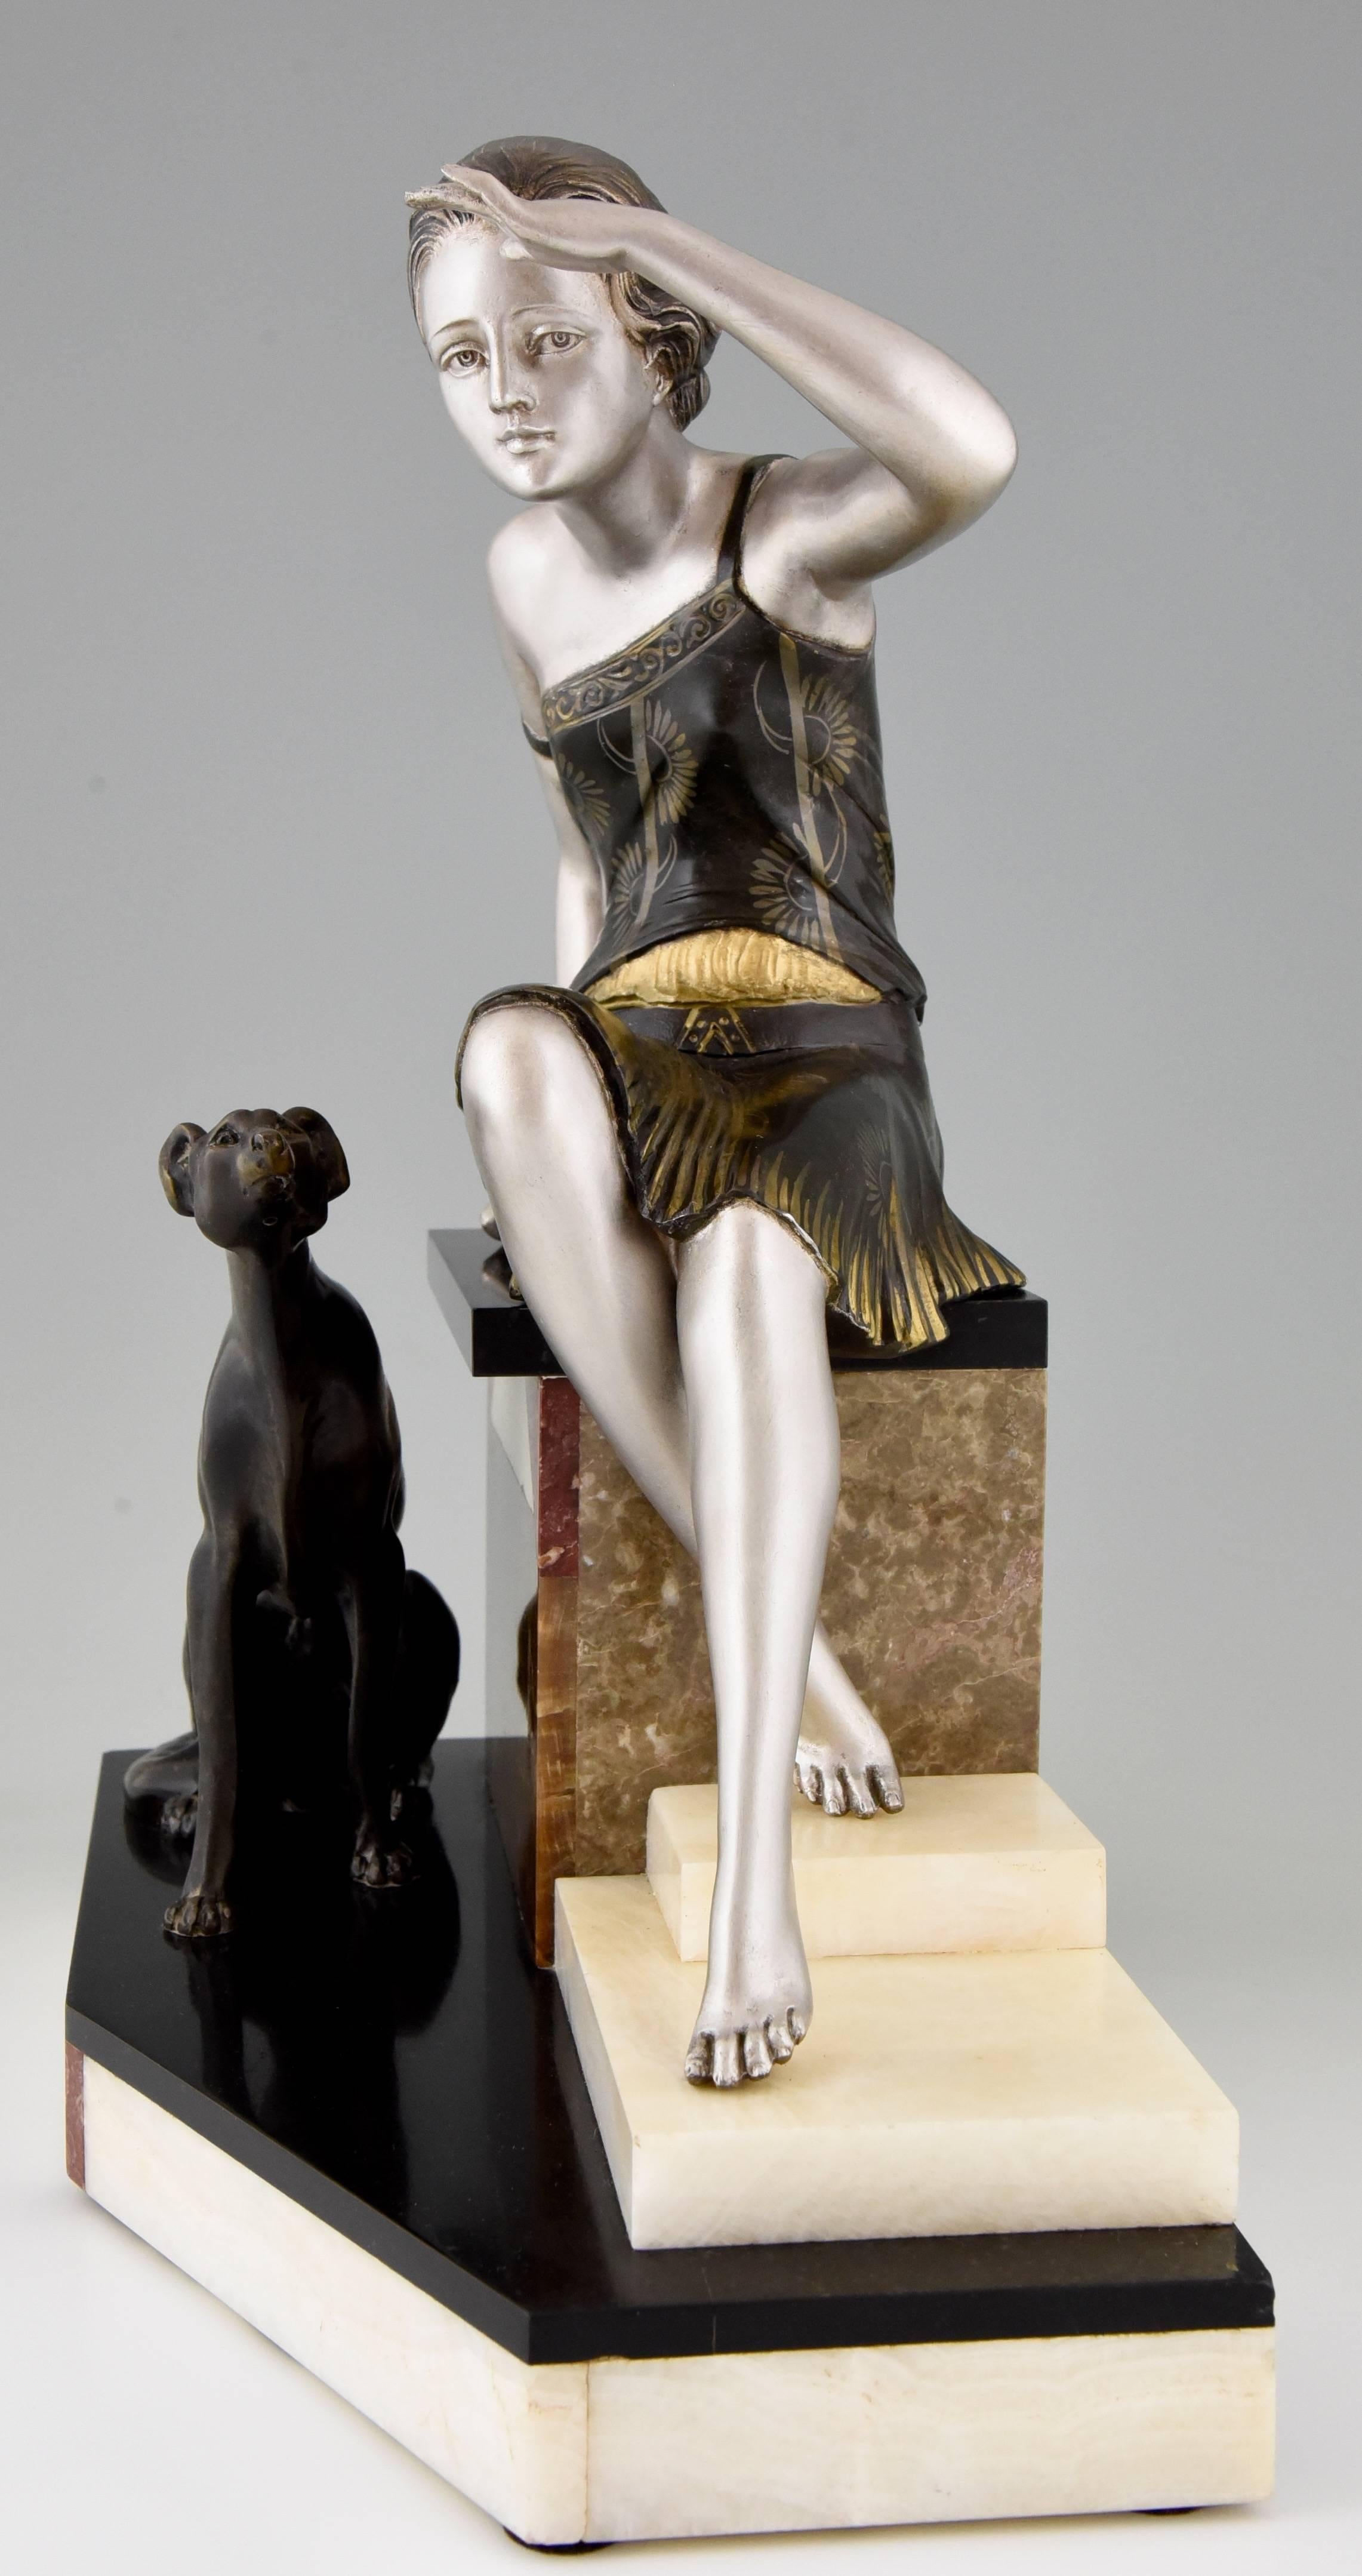 Patinated French Art Deco Sculpture Woman with Borzoi Dog by Uriano, 1930